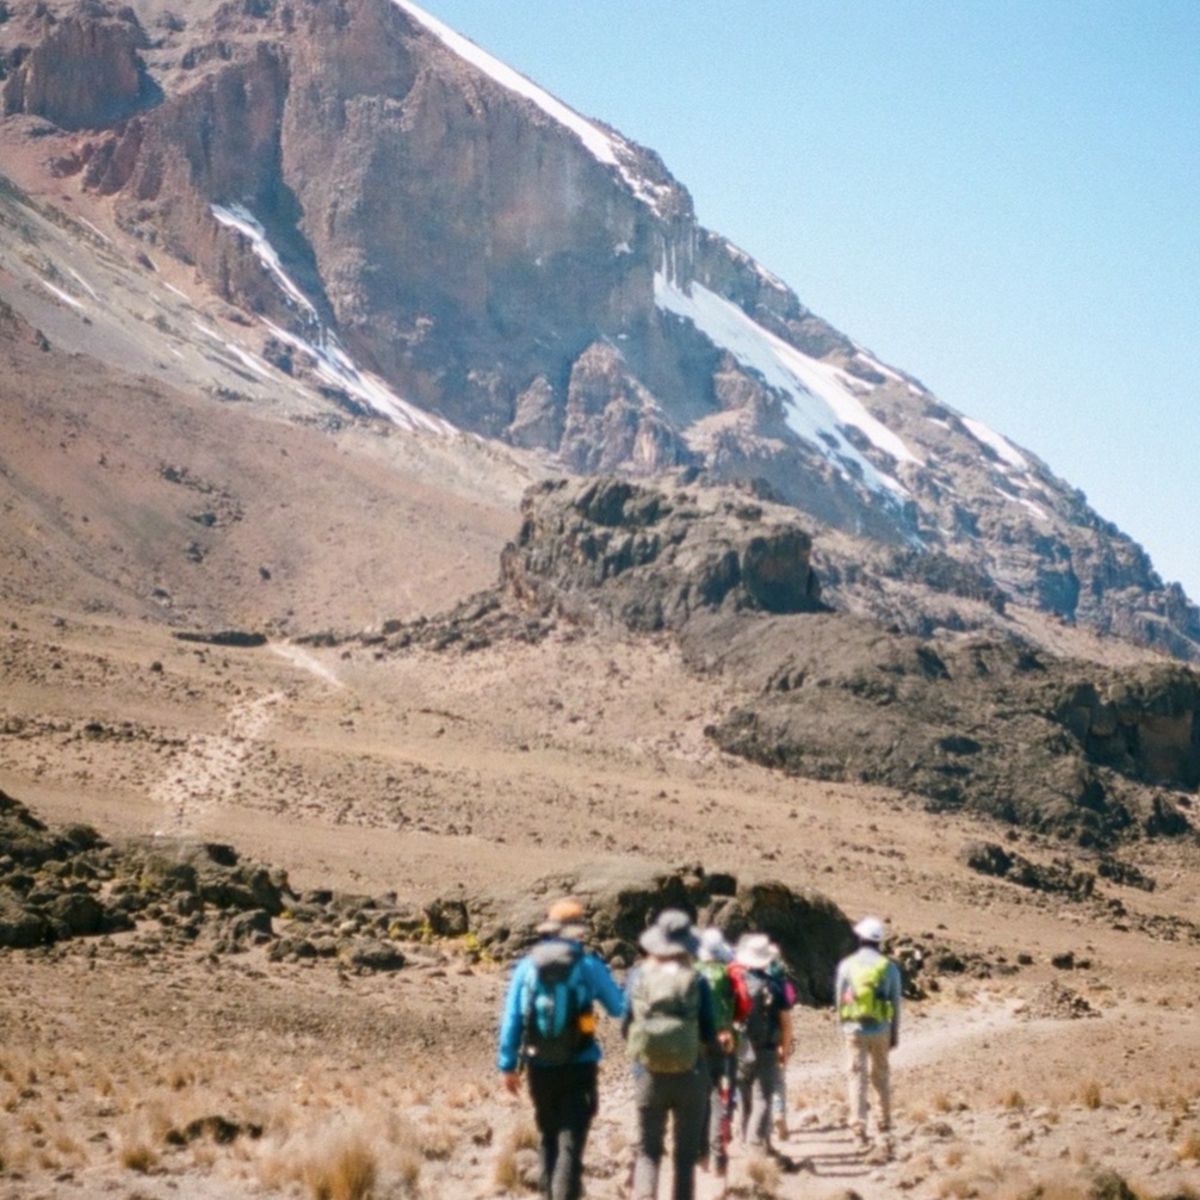 Group of hikers from behind walking path in alpine one of Mt Kilimanjaro